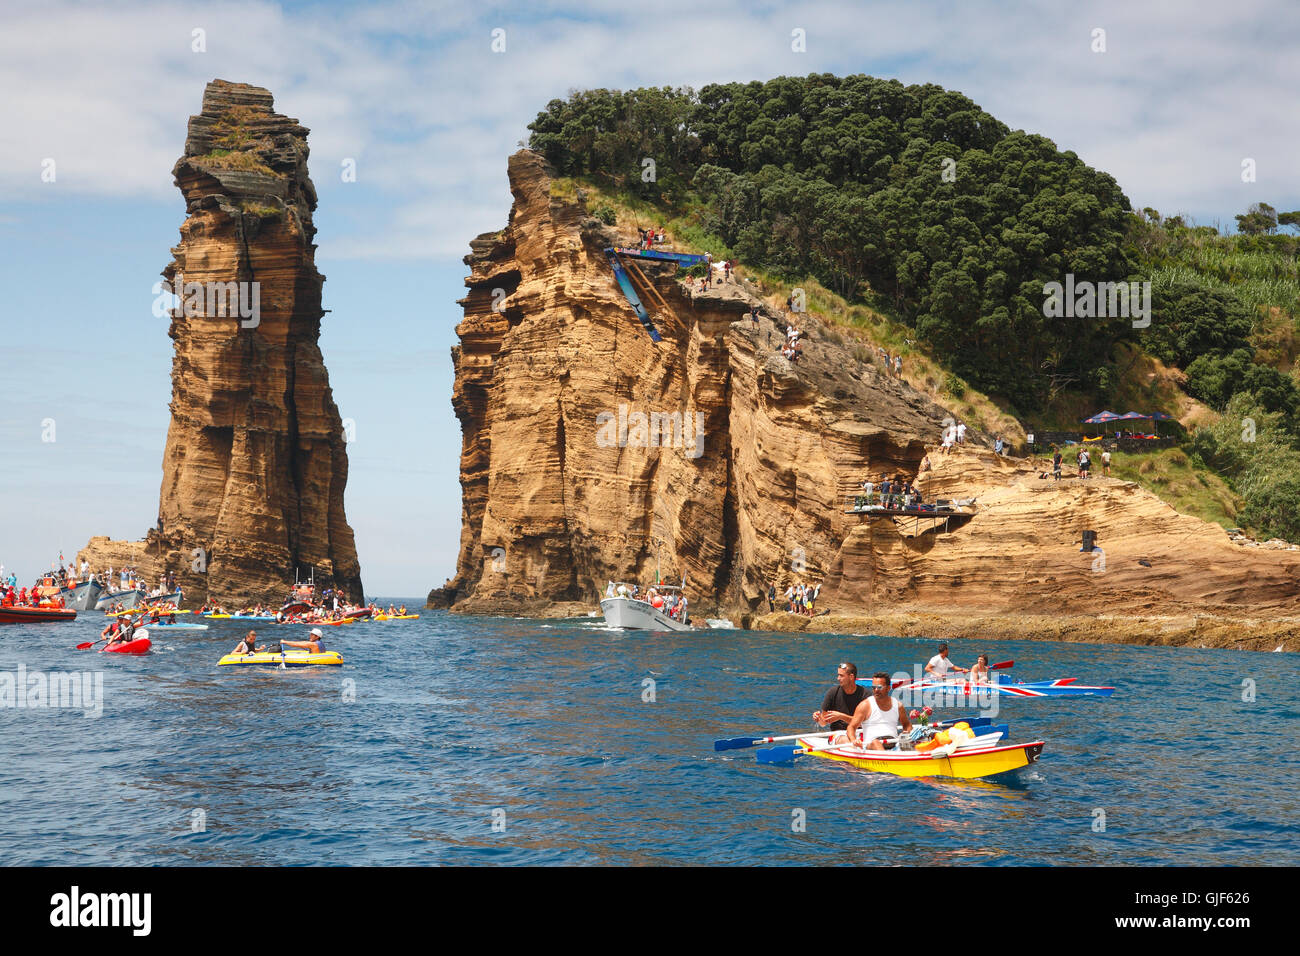 Red Bull Cliff Diving 2012, off the coast of Sao Miguel island, Azores islands, Portugal. Stock Photo